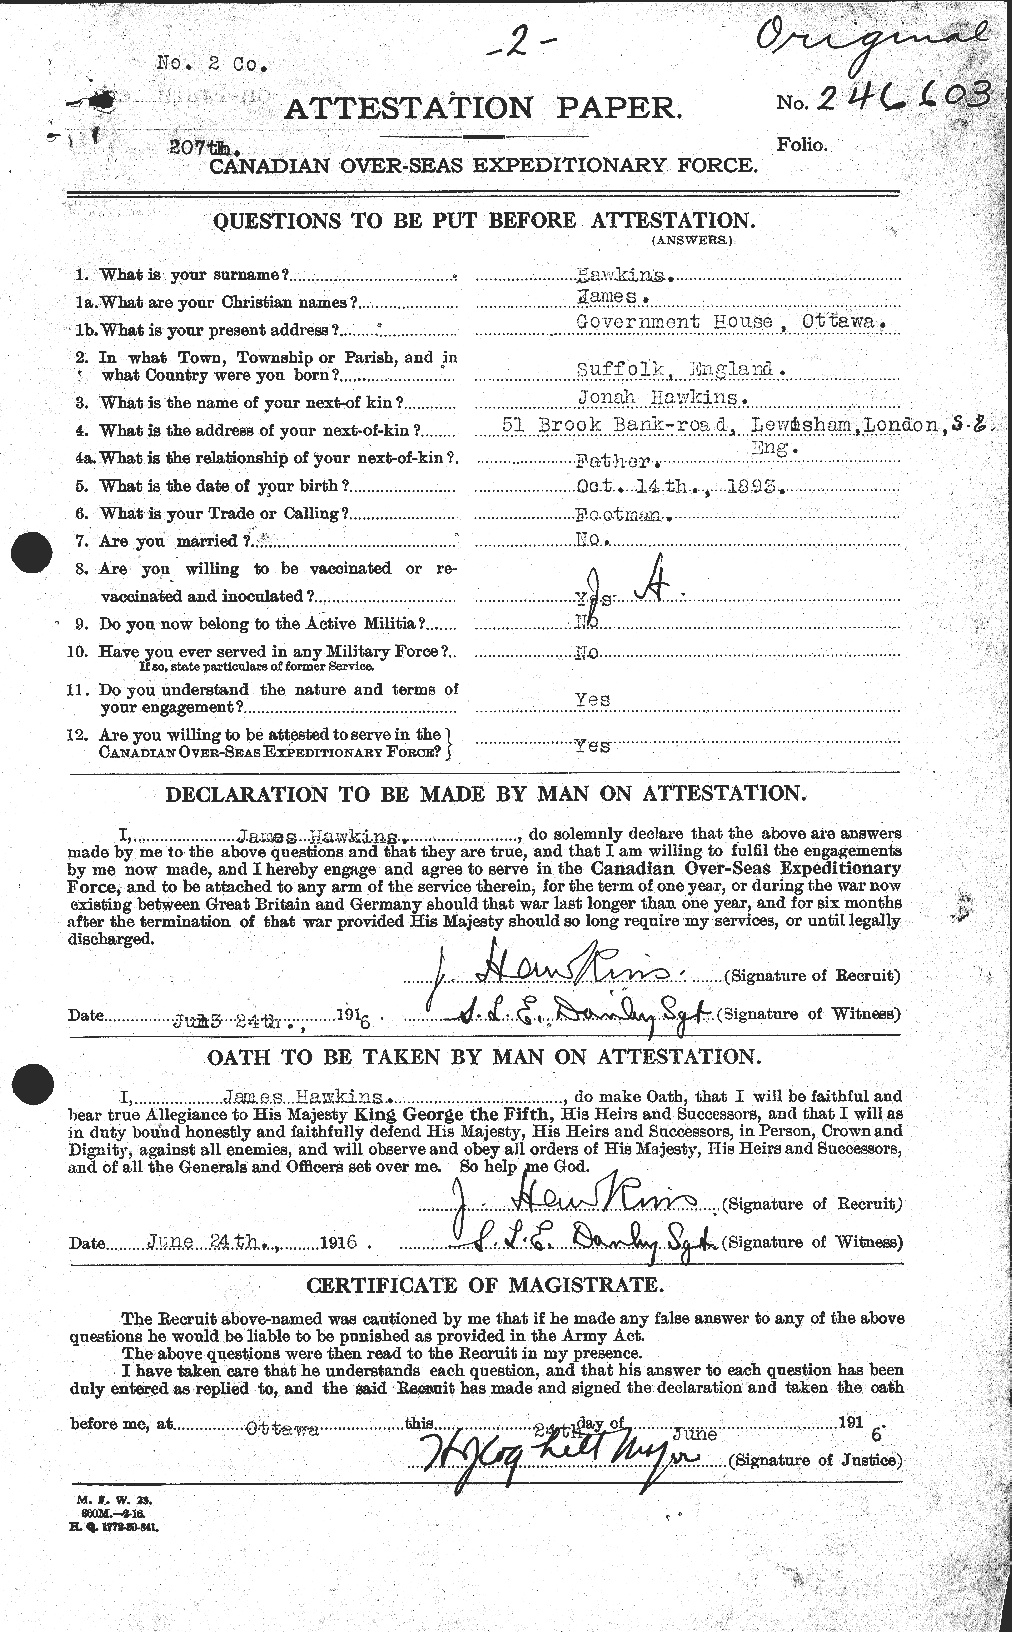 Personnel Records of the First World War - CEF 387166a